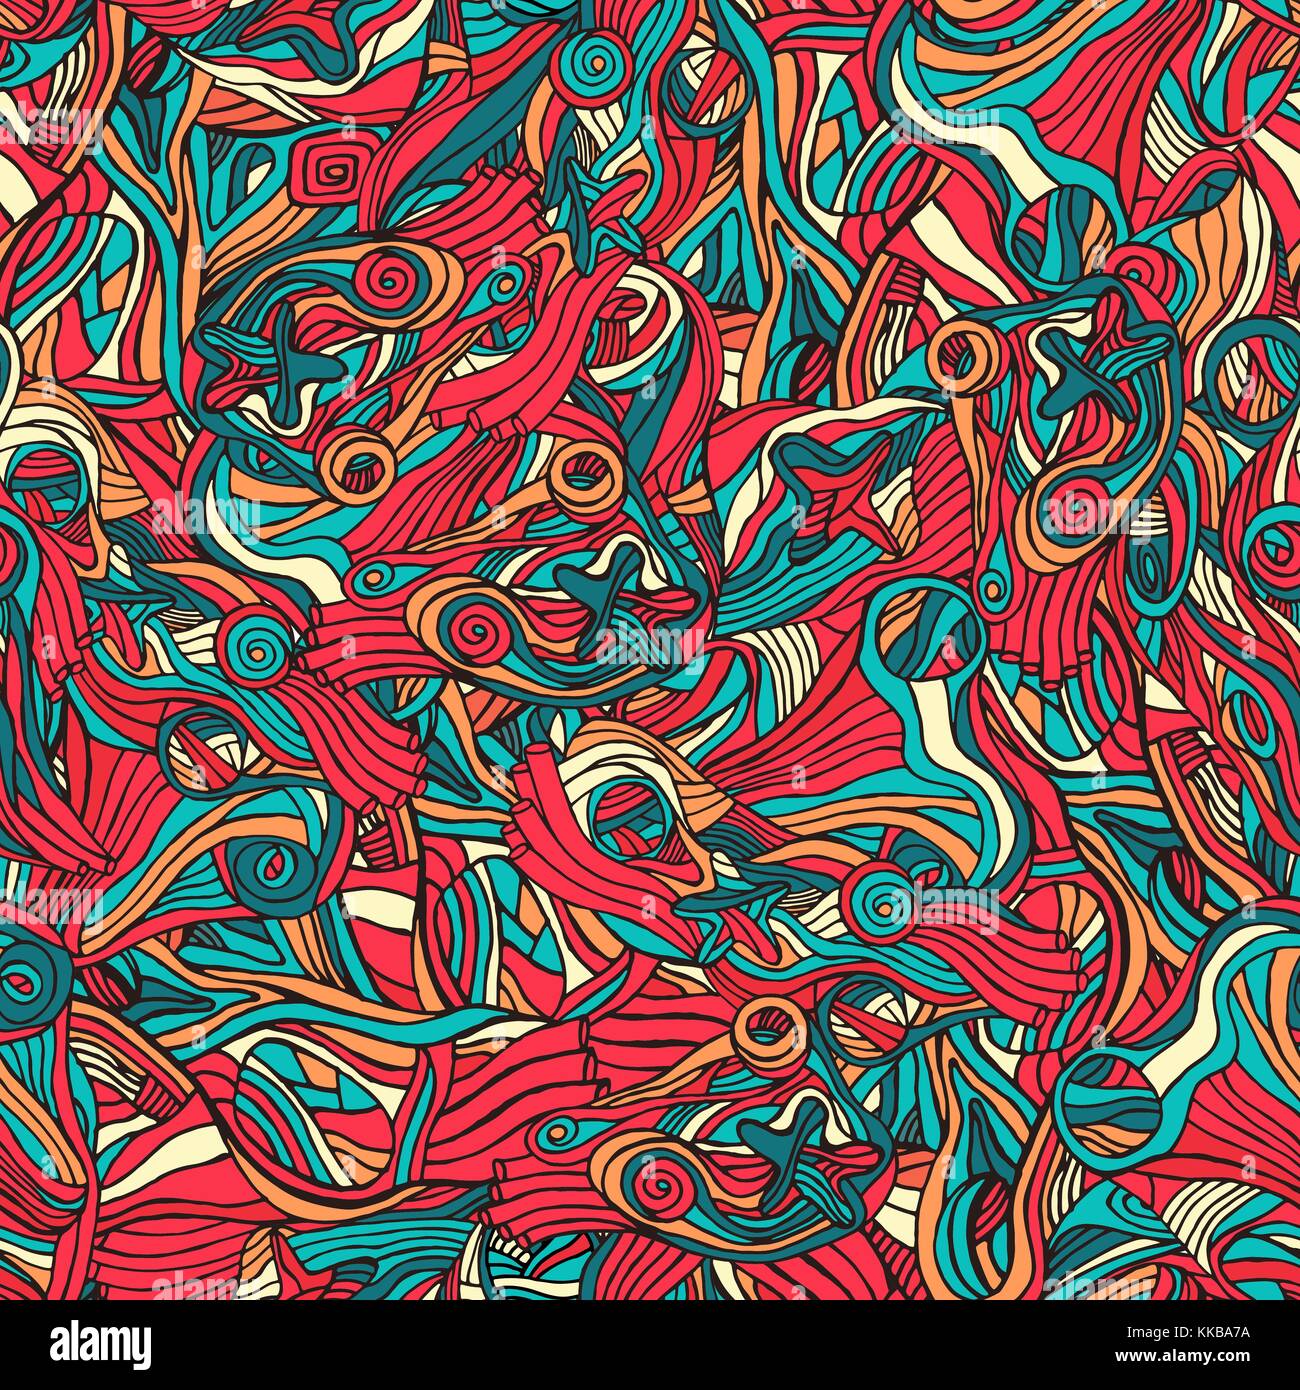 Colorful Doodle Abstract Seamless Pattern Can Be Used For Wallpaper